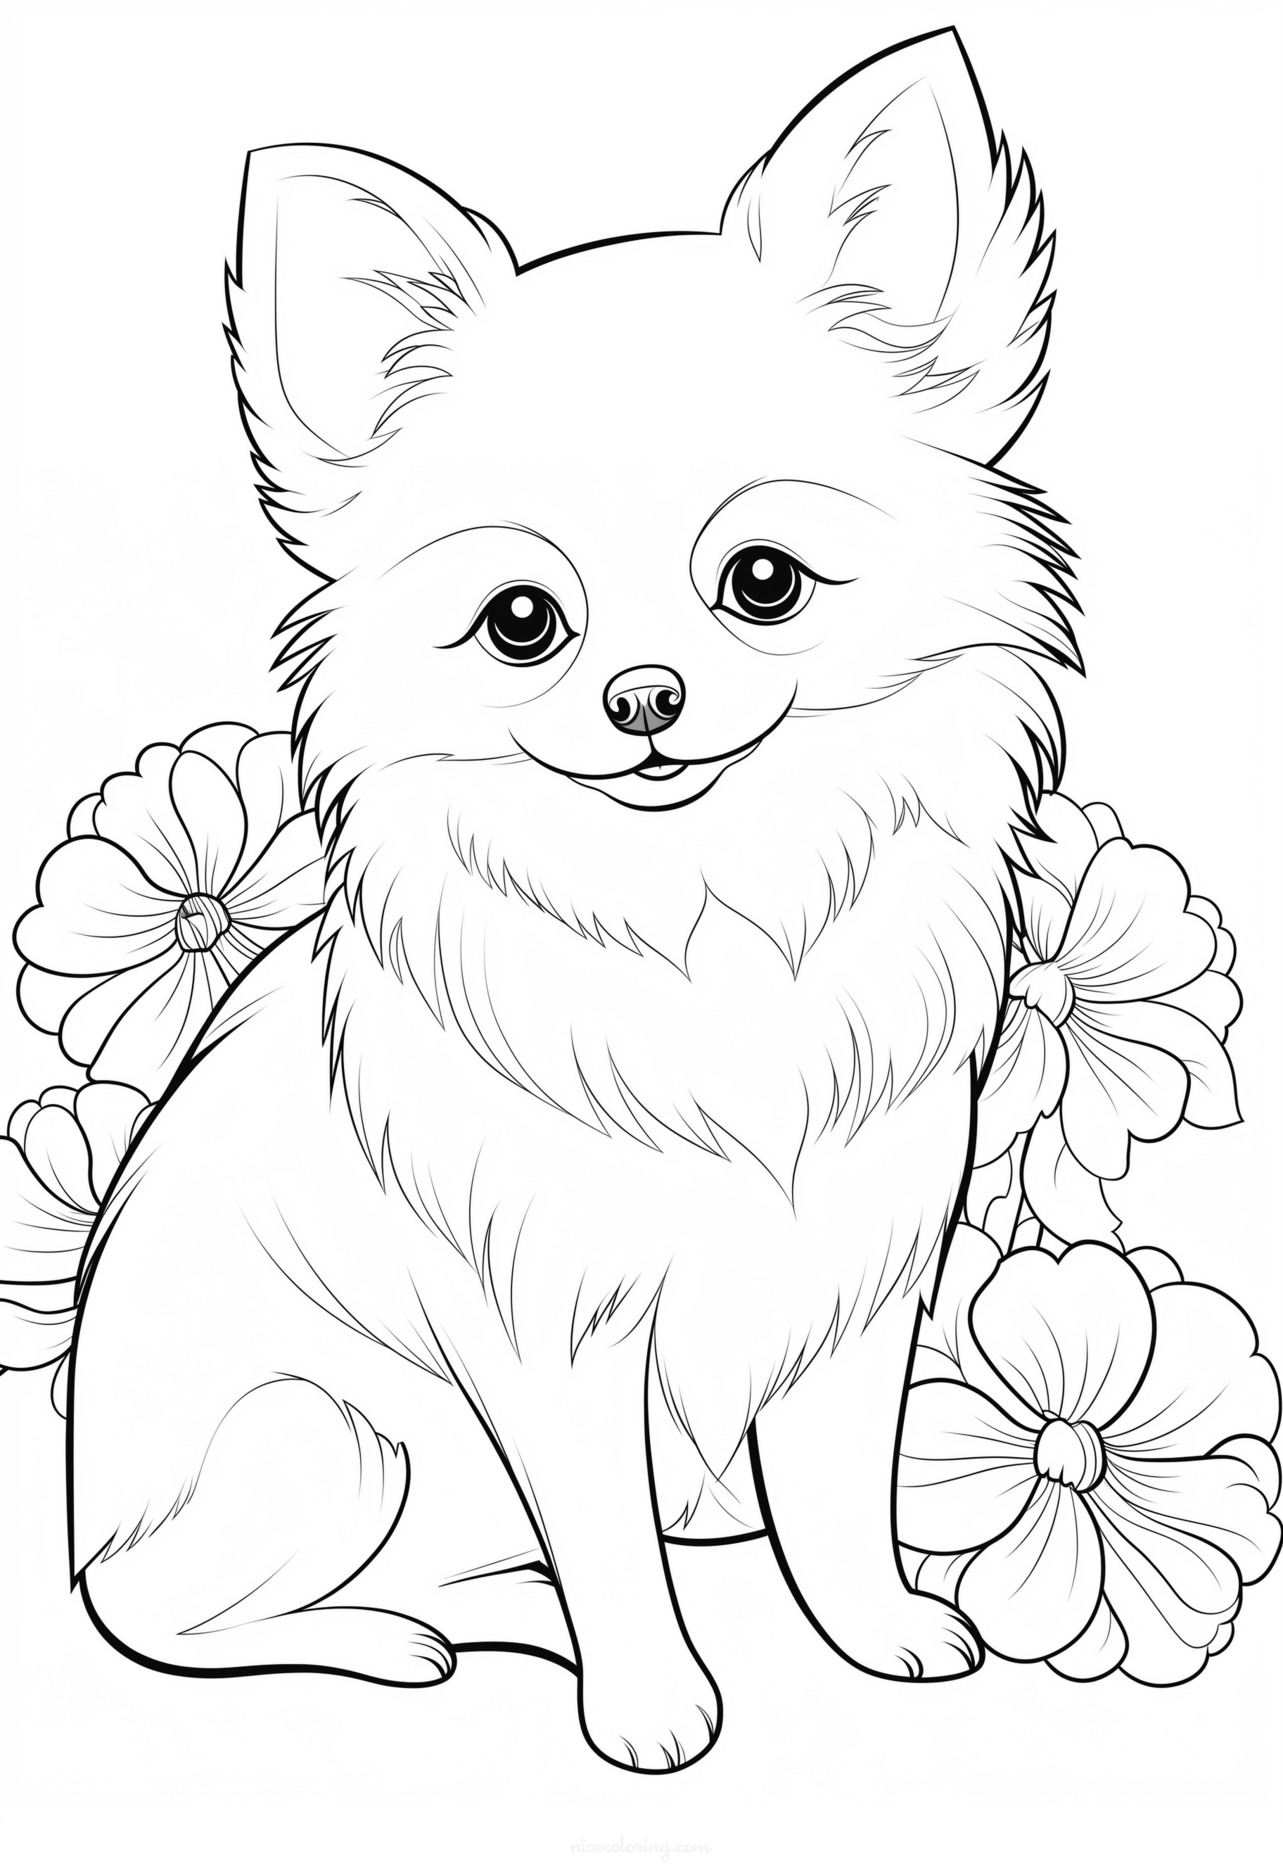 Happy dog waiting to be colored